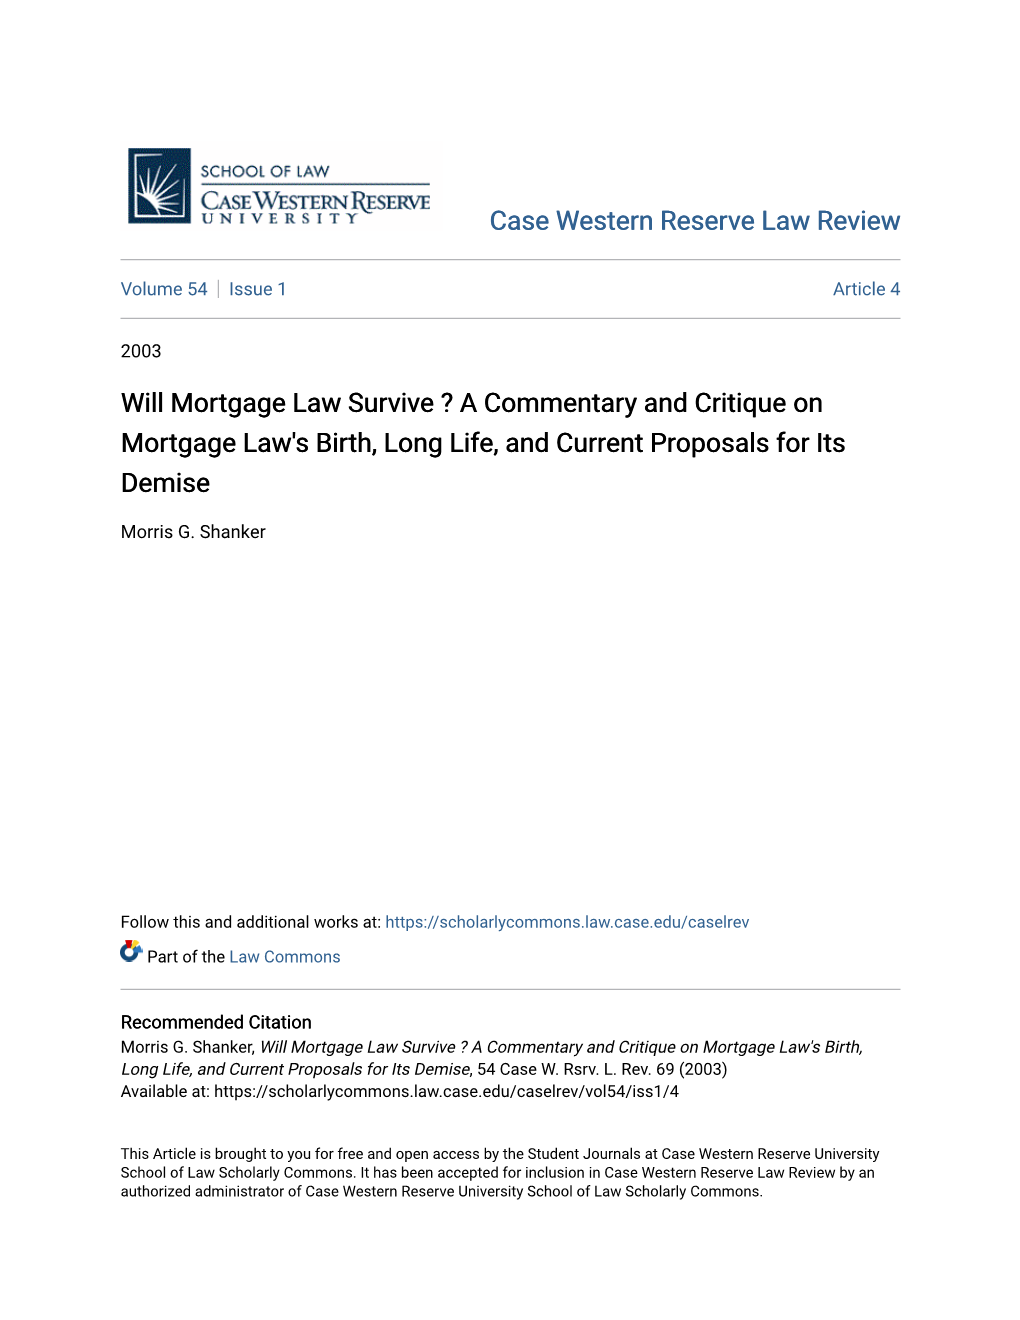 Will Mortgage Law Survive ? a Commentary and Critique on Mortgage Law's Birth, Long Life, and Current Proposals for Its Demise